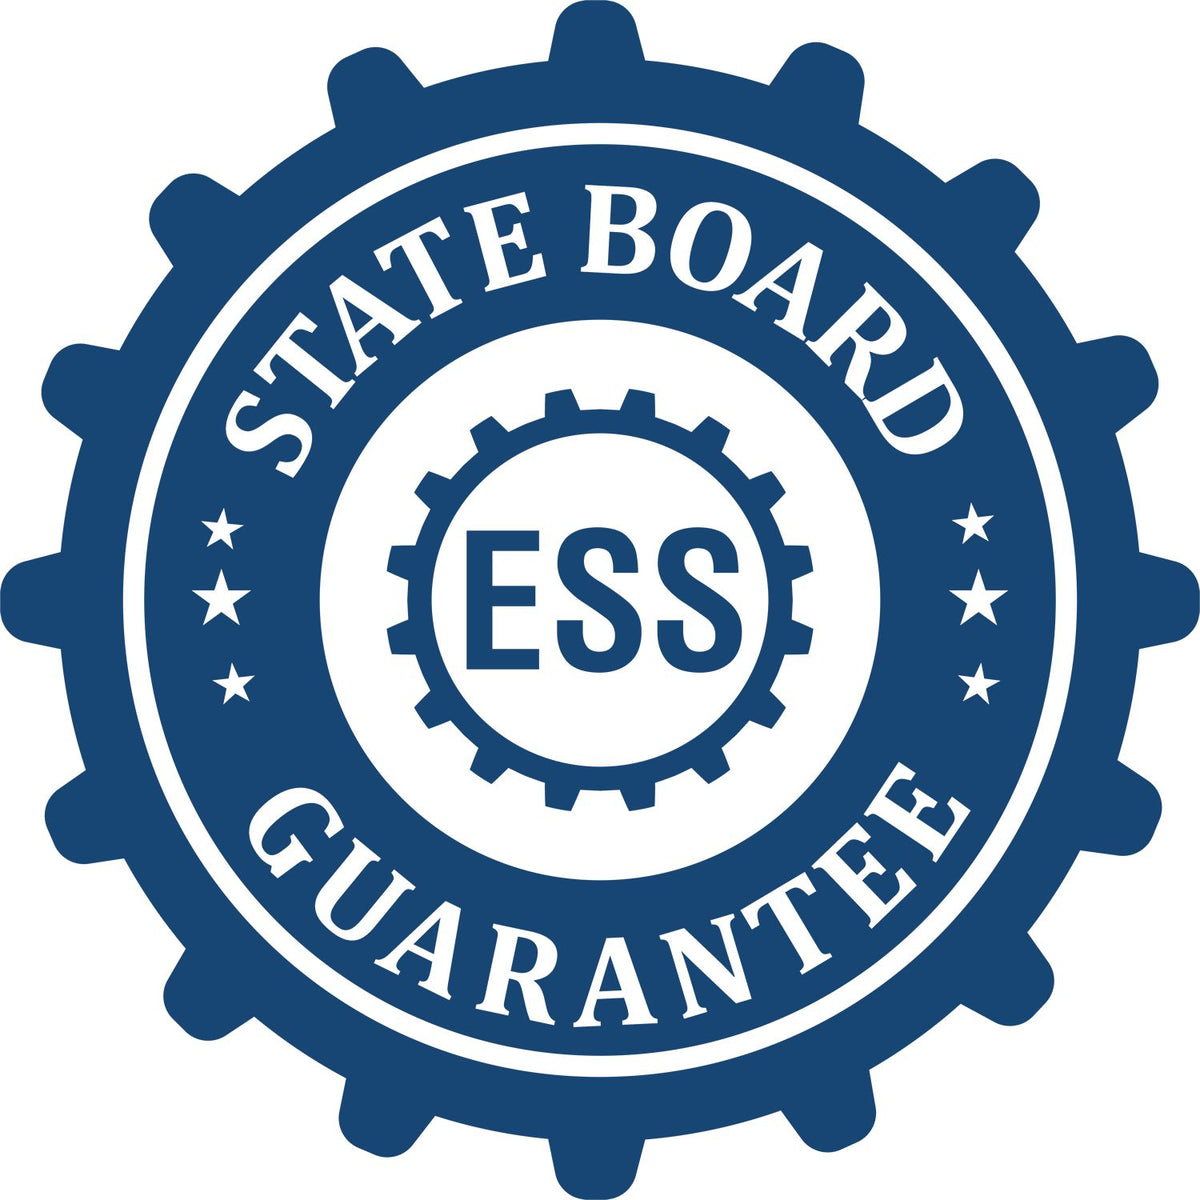 An emblem in a gear shape illustrating a state board guarantee for the State of Colorado Long Reach Architectural Embossing Seal product.